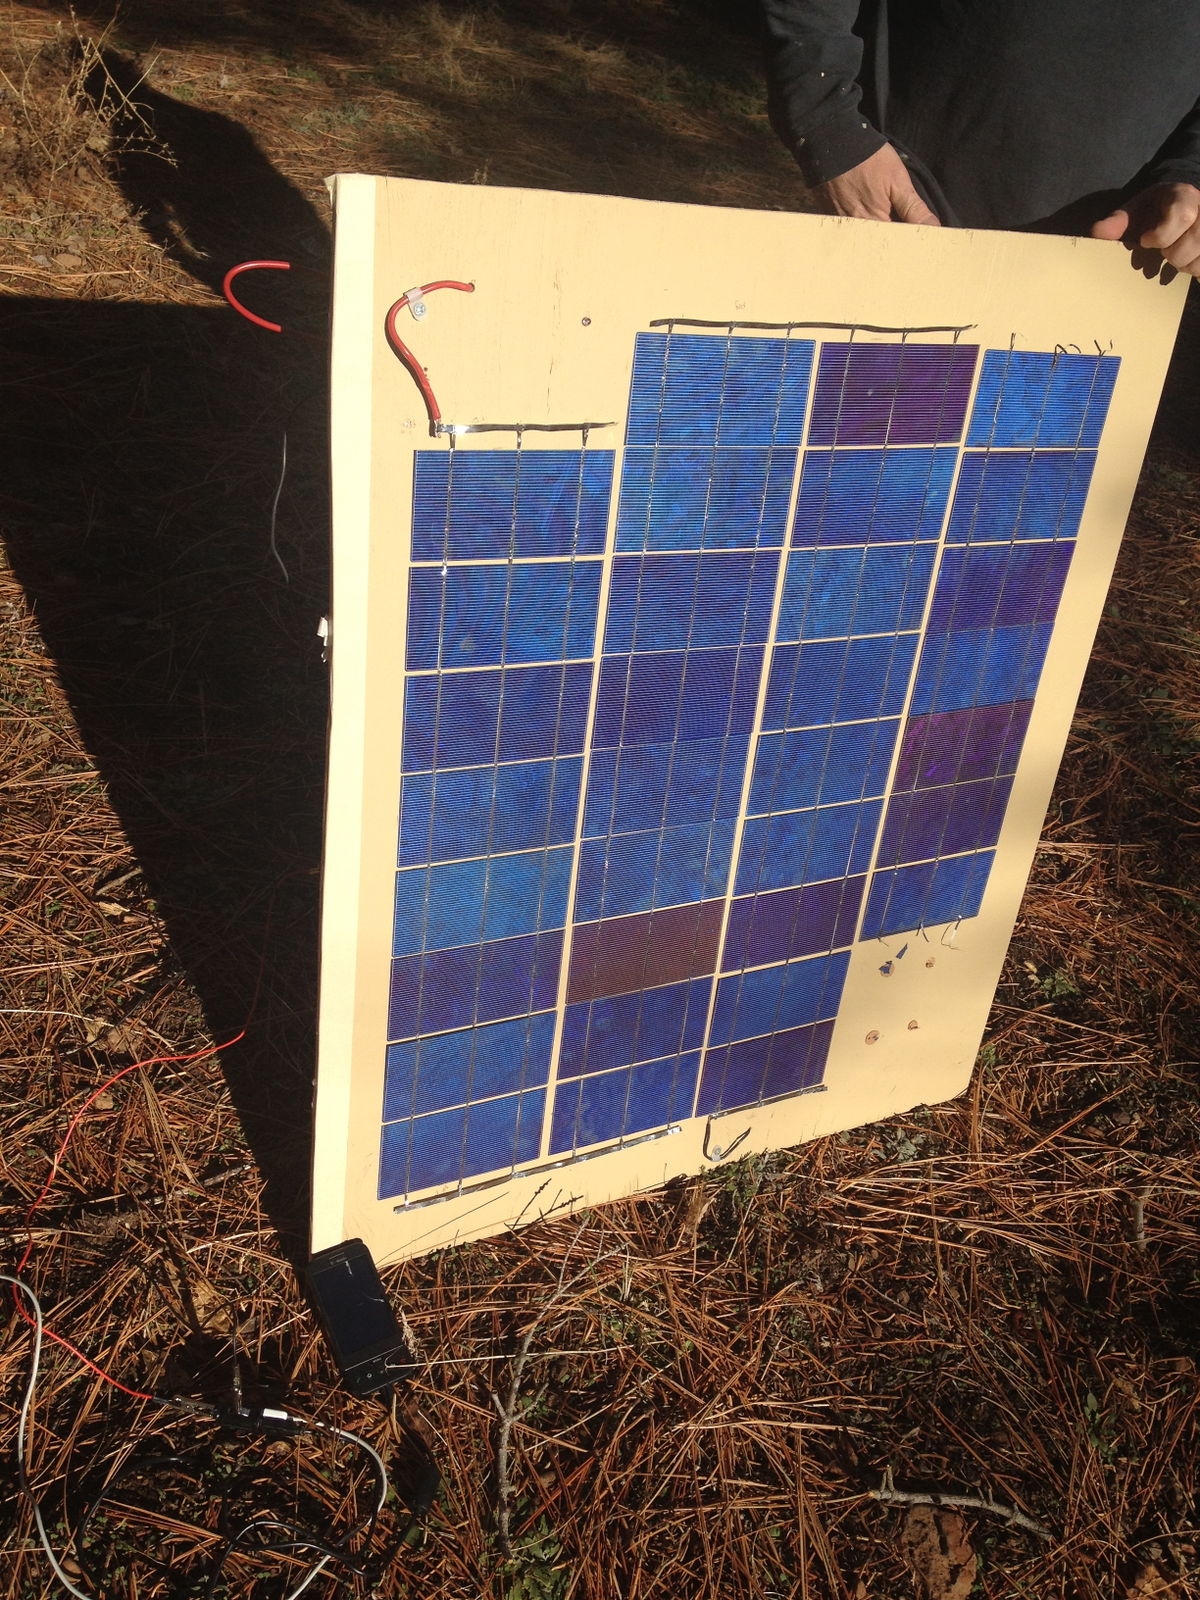 DIY Solar Panel - Appropedia, the sustainability wiki